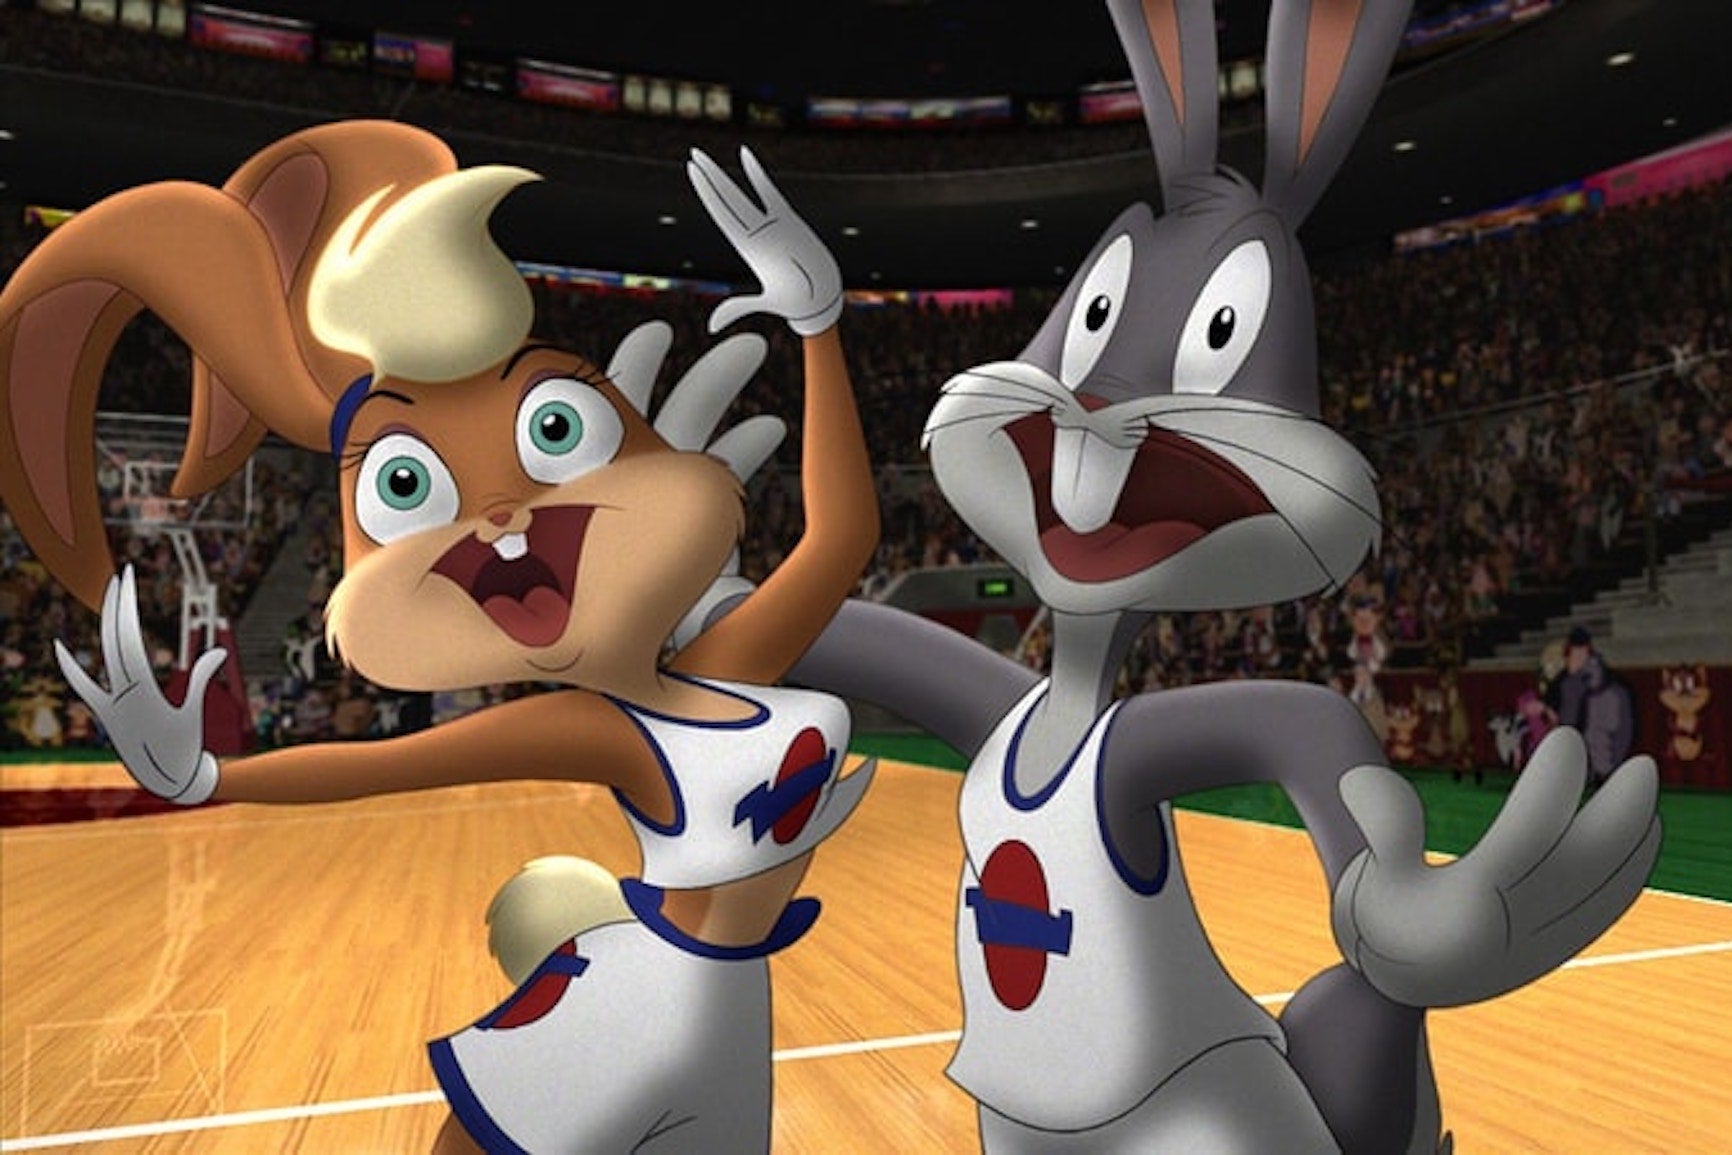 Two cartoon rabbits, one beige with blond hair and one gray with a white muzzle, move toward each other as if about to embrace. 